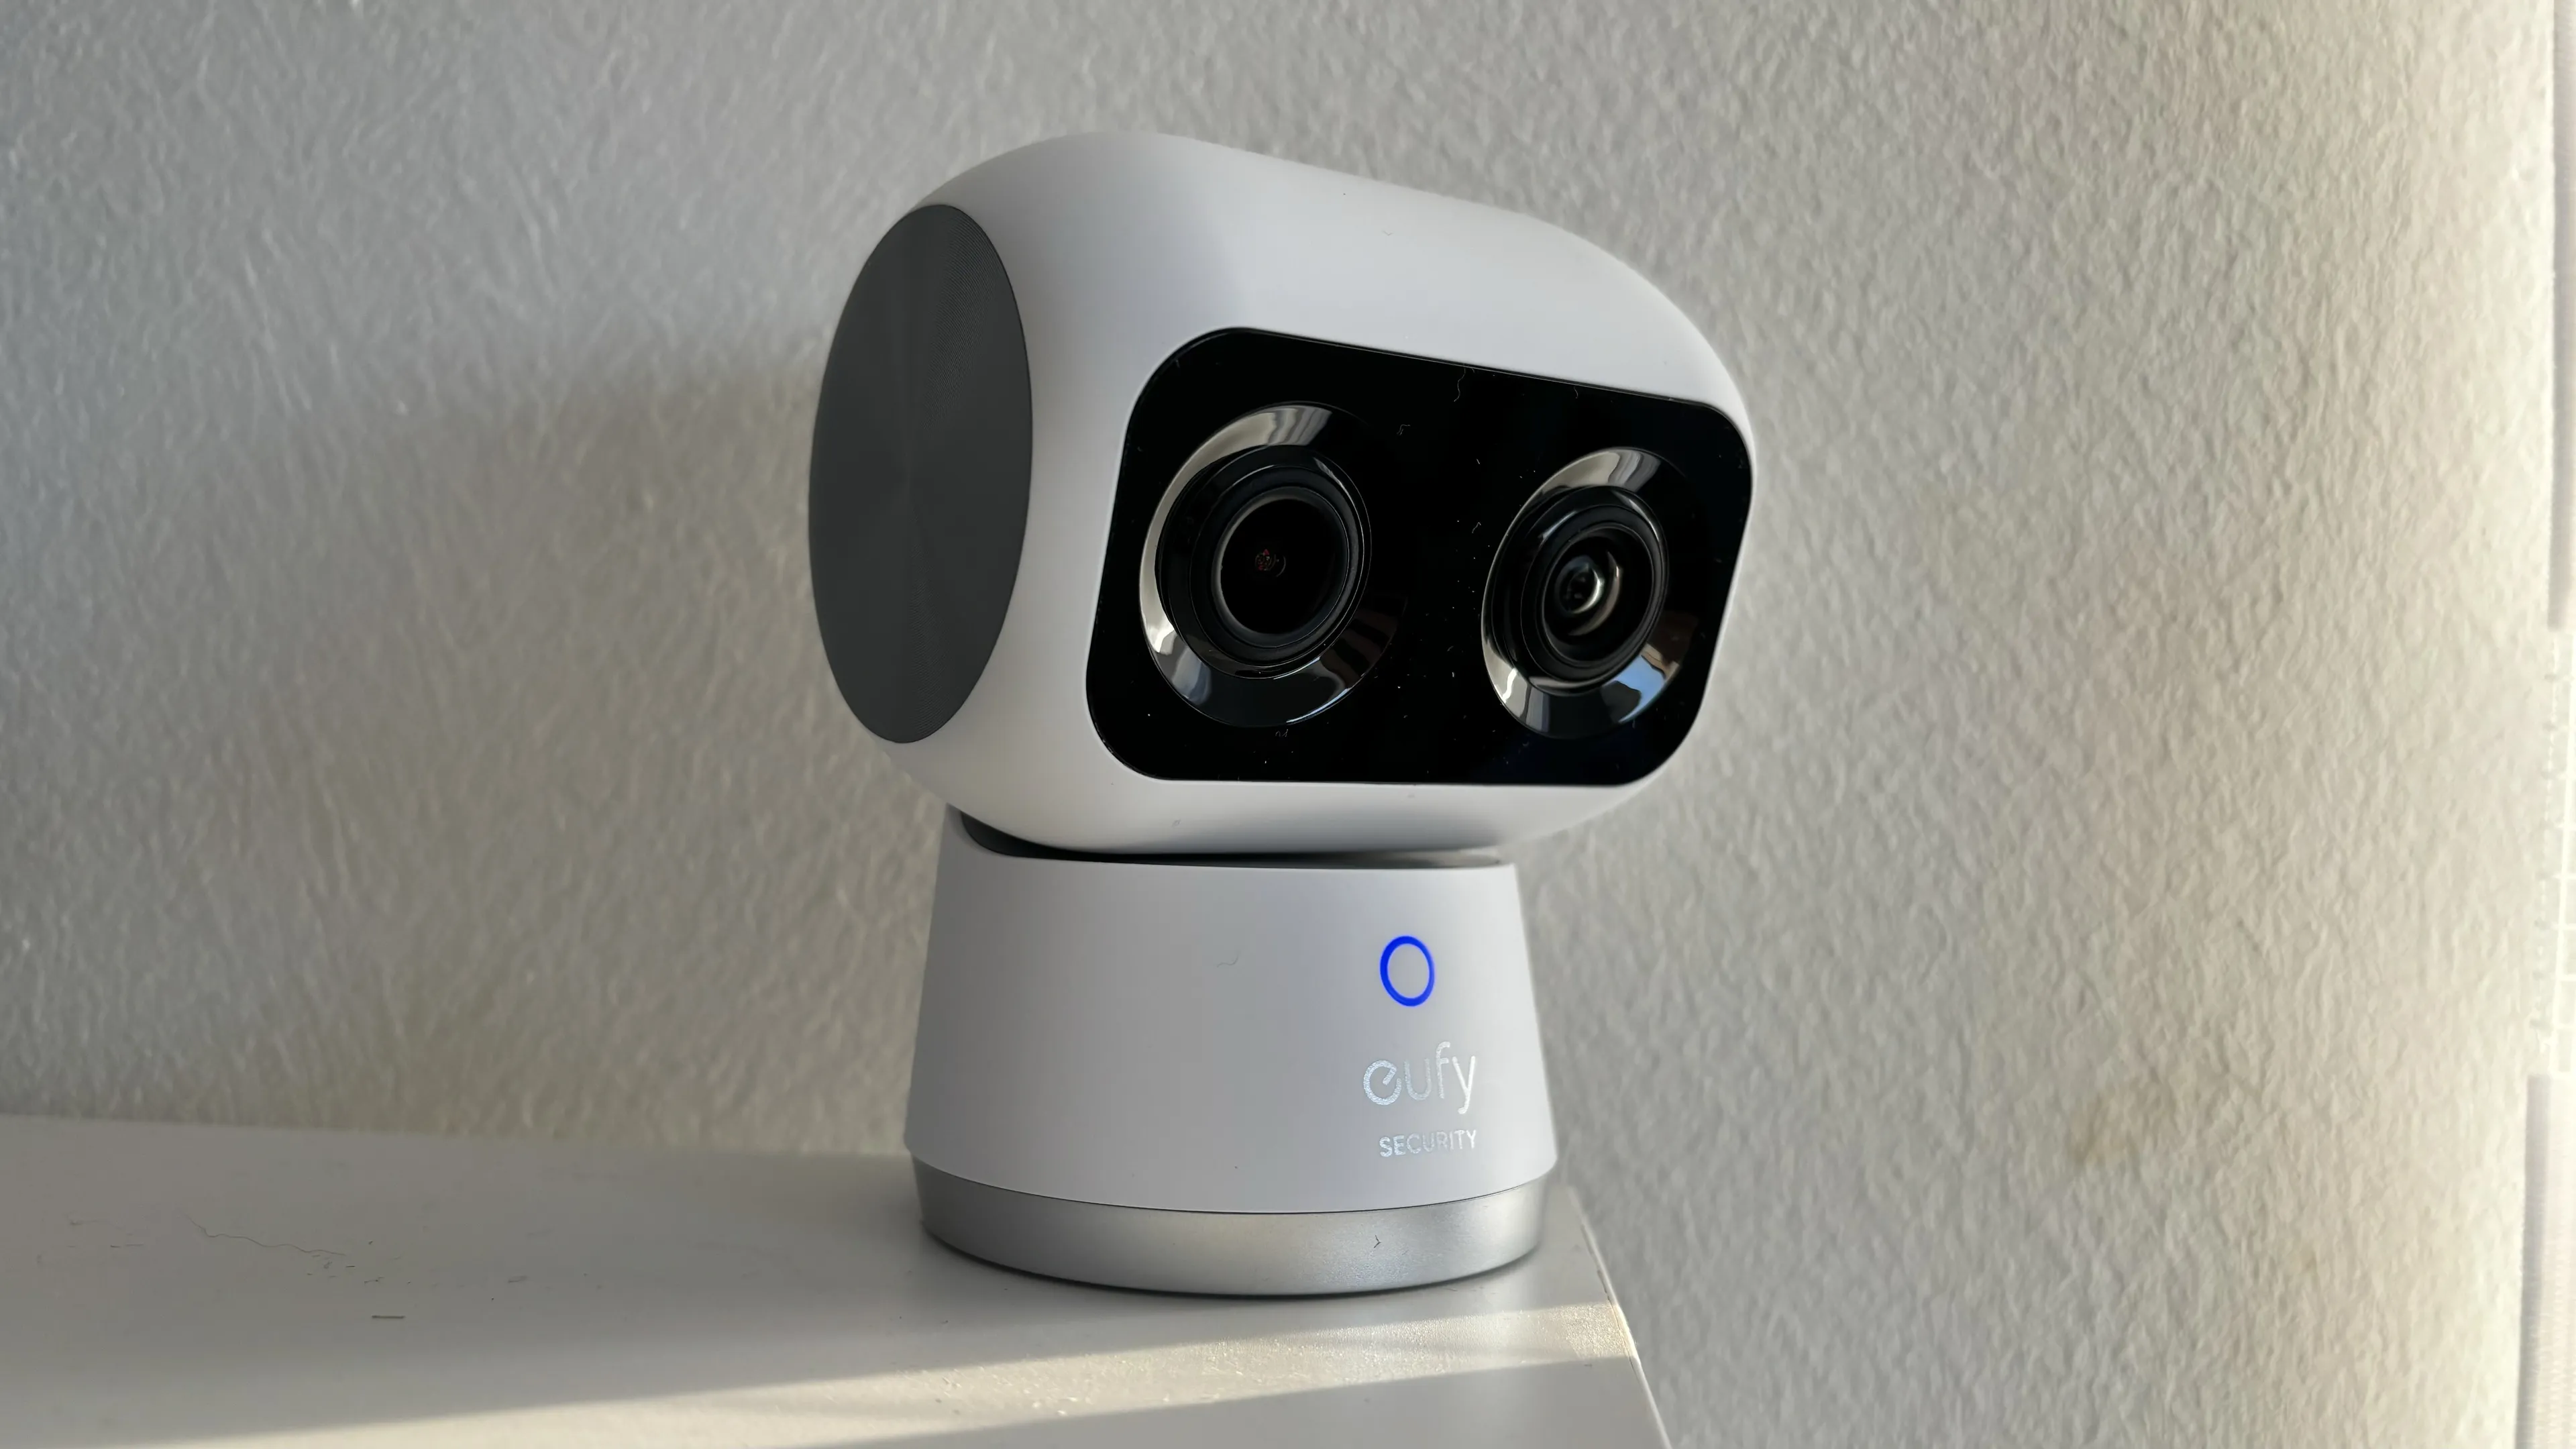 eufy indoor cam s350 review 7f1710419376